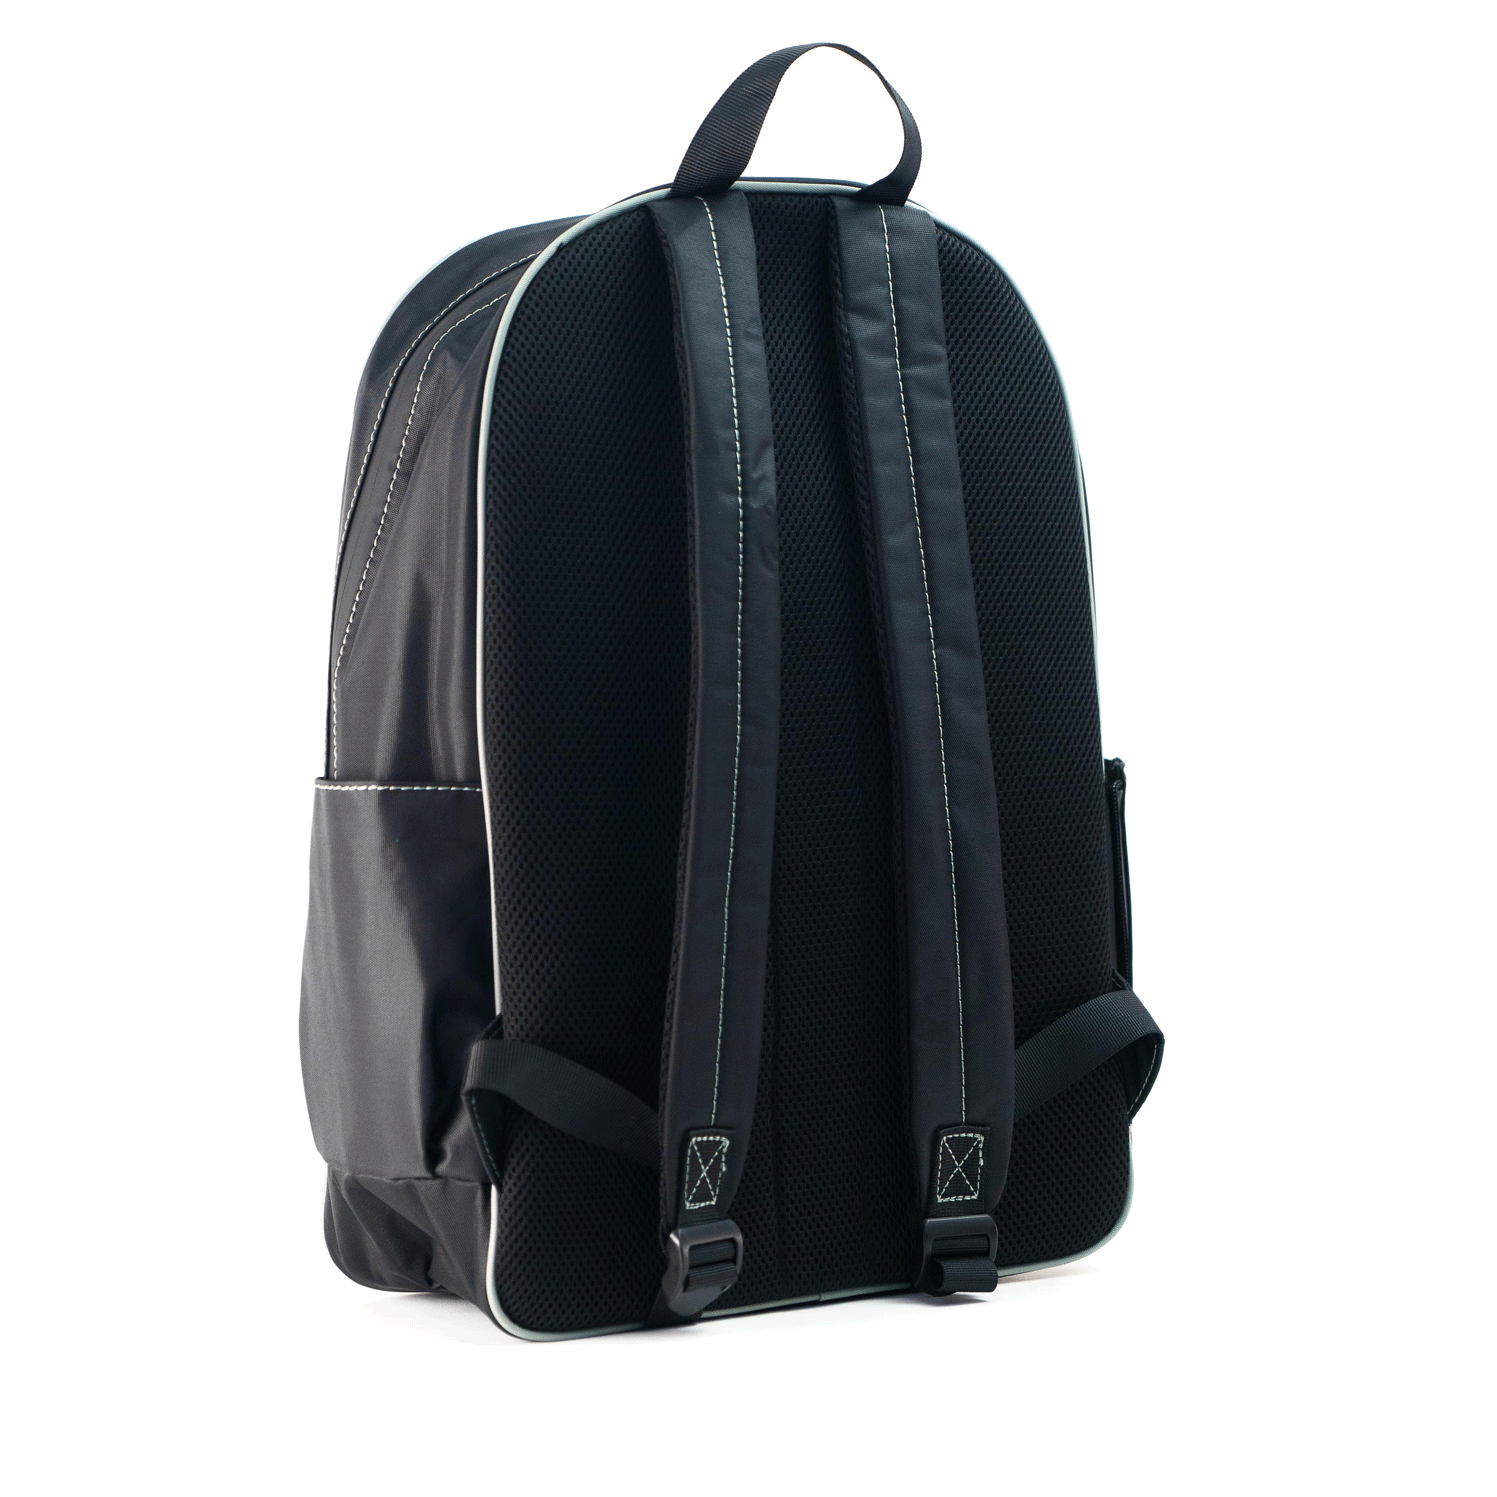 PURIZE® activated carbon backpack